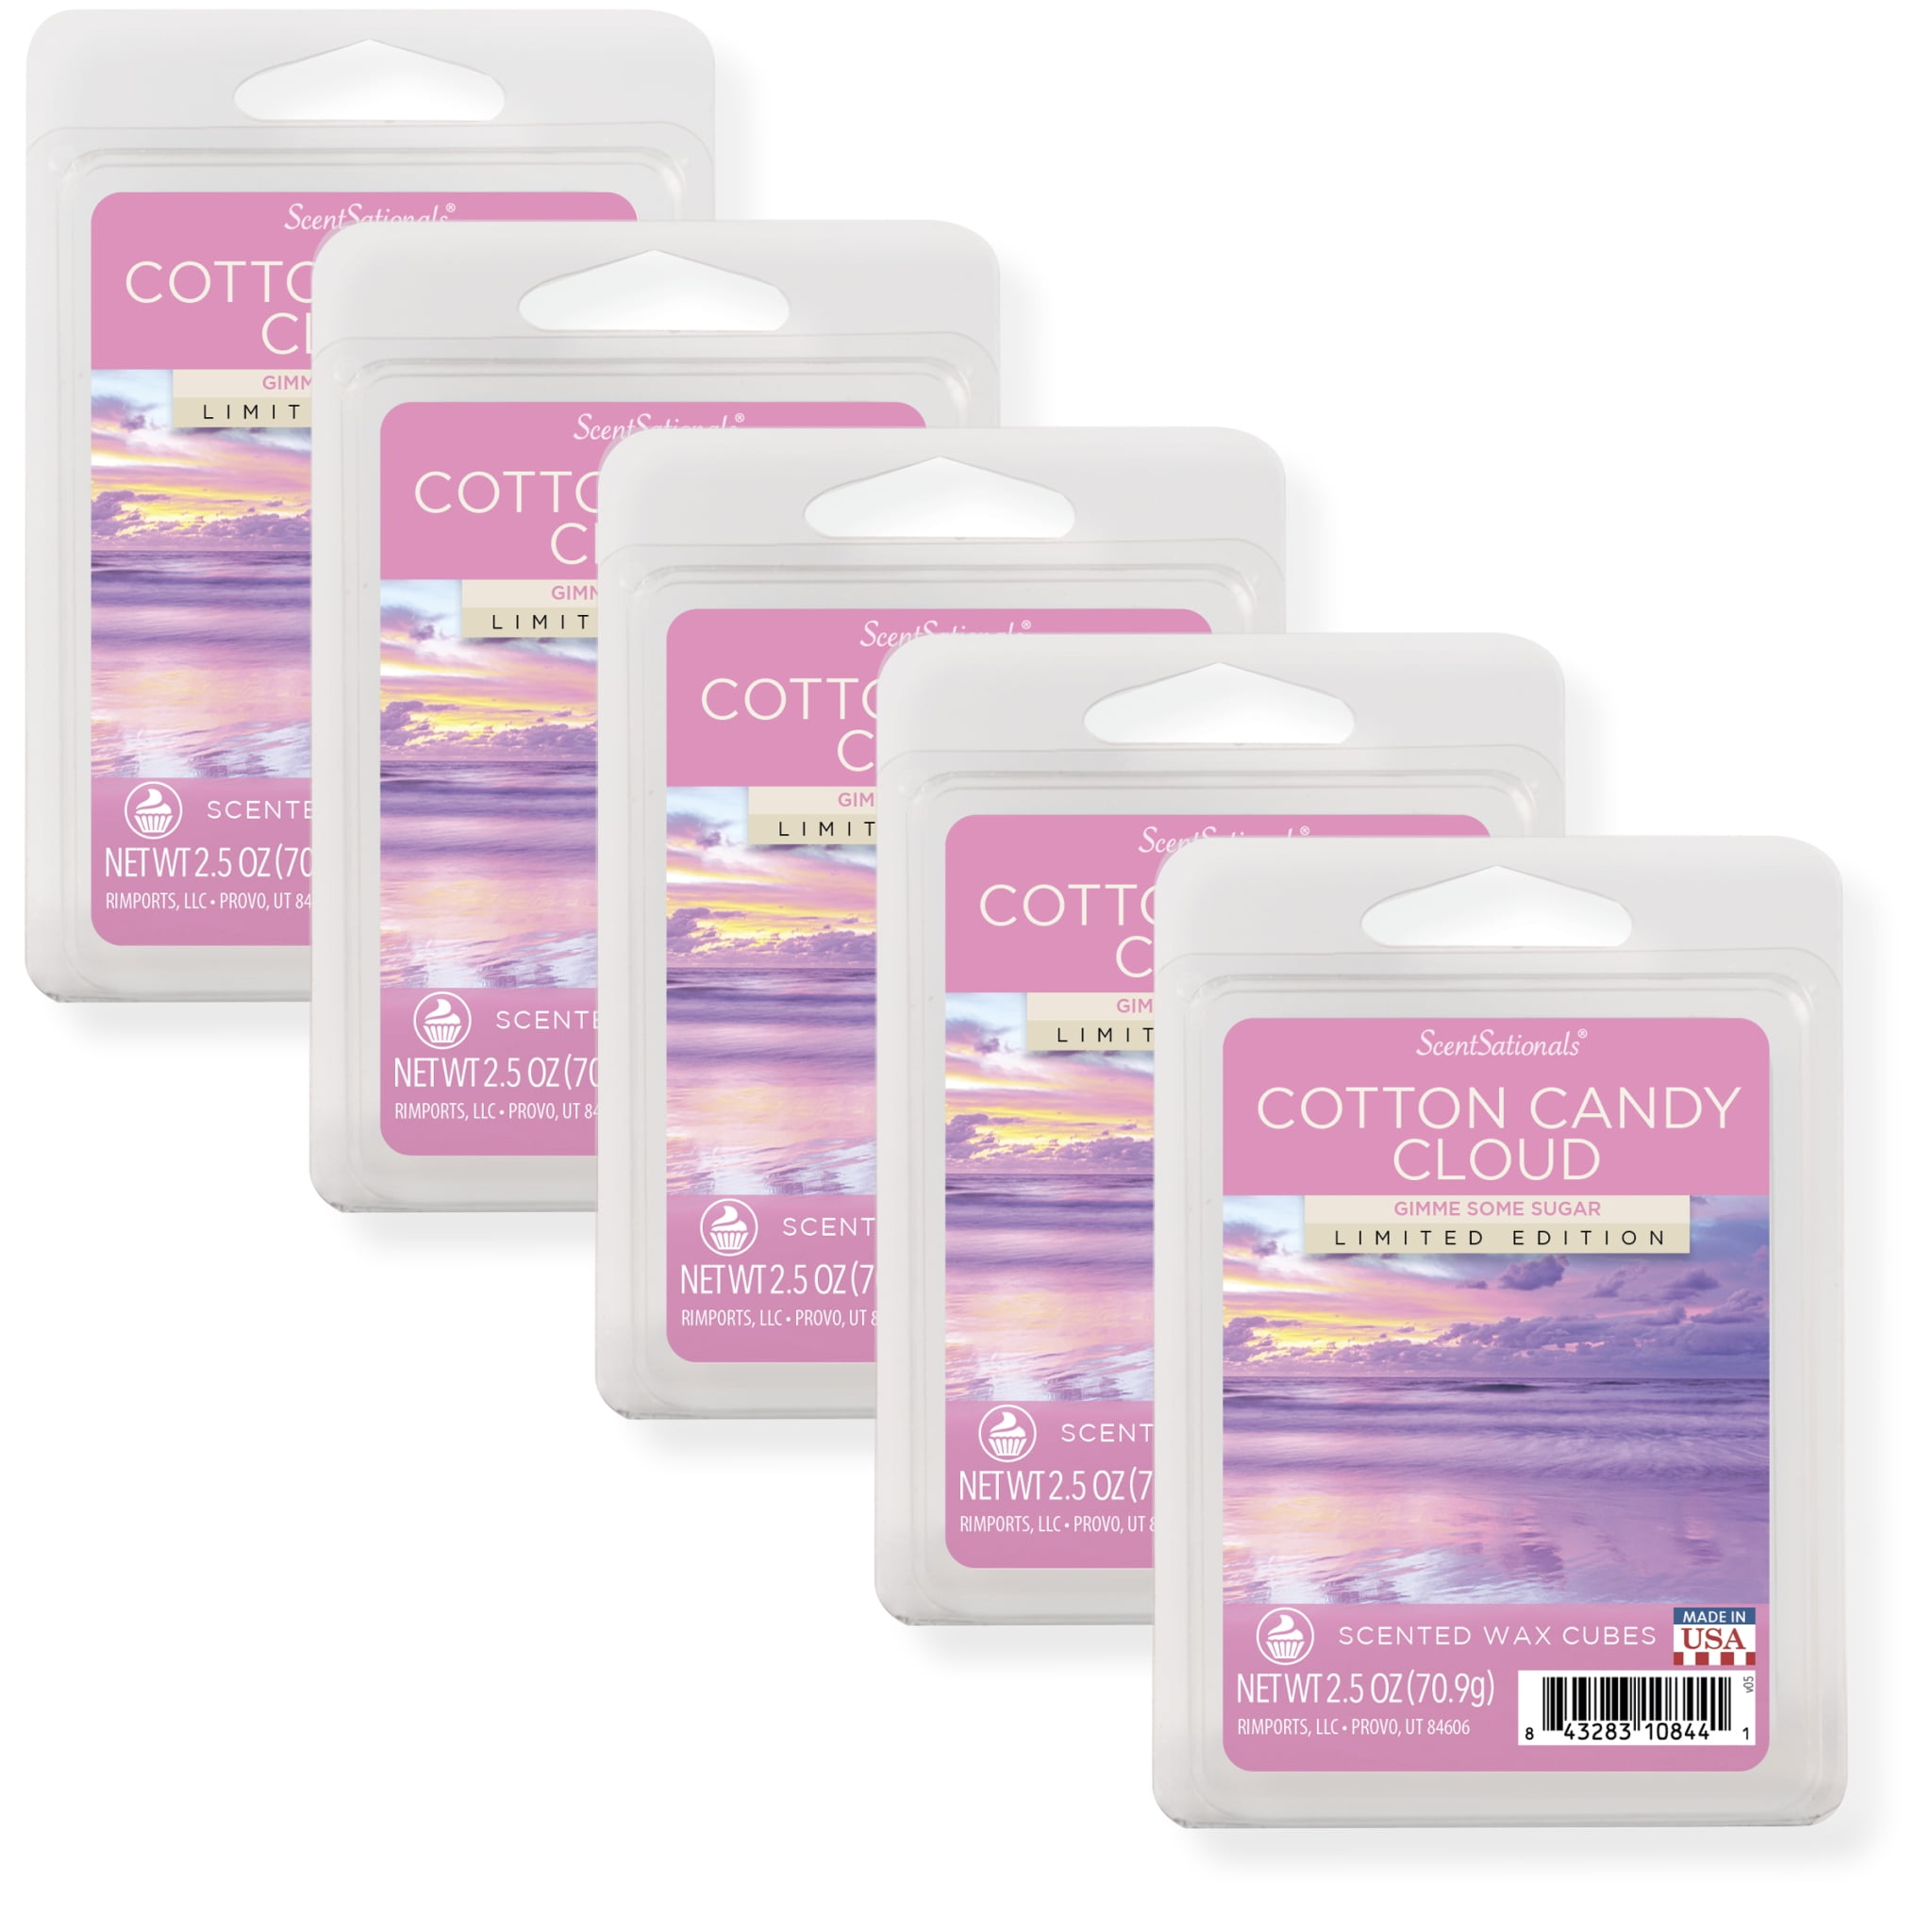 Candy Scented Wax Melts Variety Pack of 6-6 Packs of Wax Melt Cubes - 6  Scents of Long Lasting Wax Melts - Candy Scented Wax Cubes - Includes  Ballard Products Air Freshener